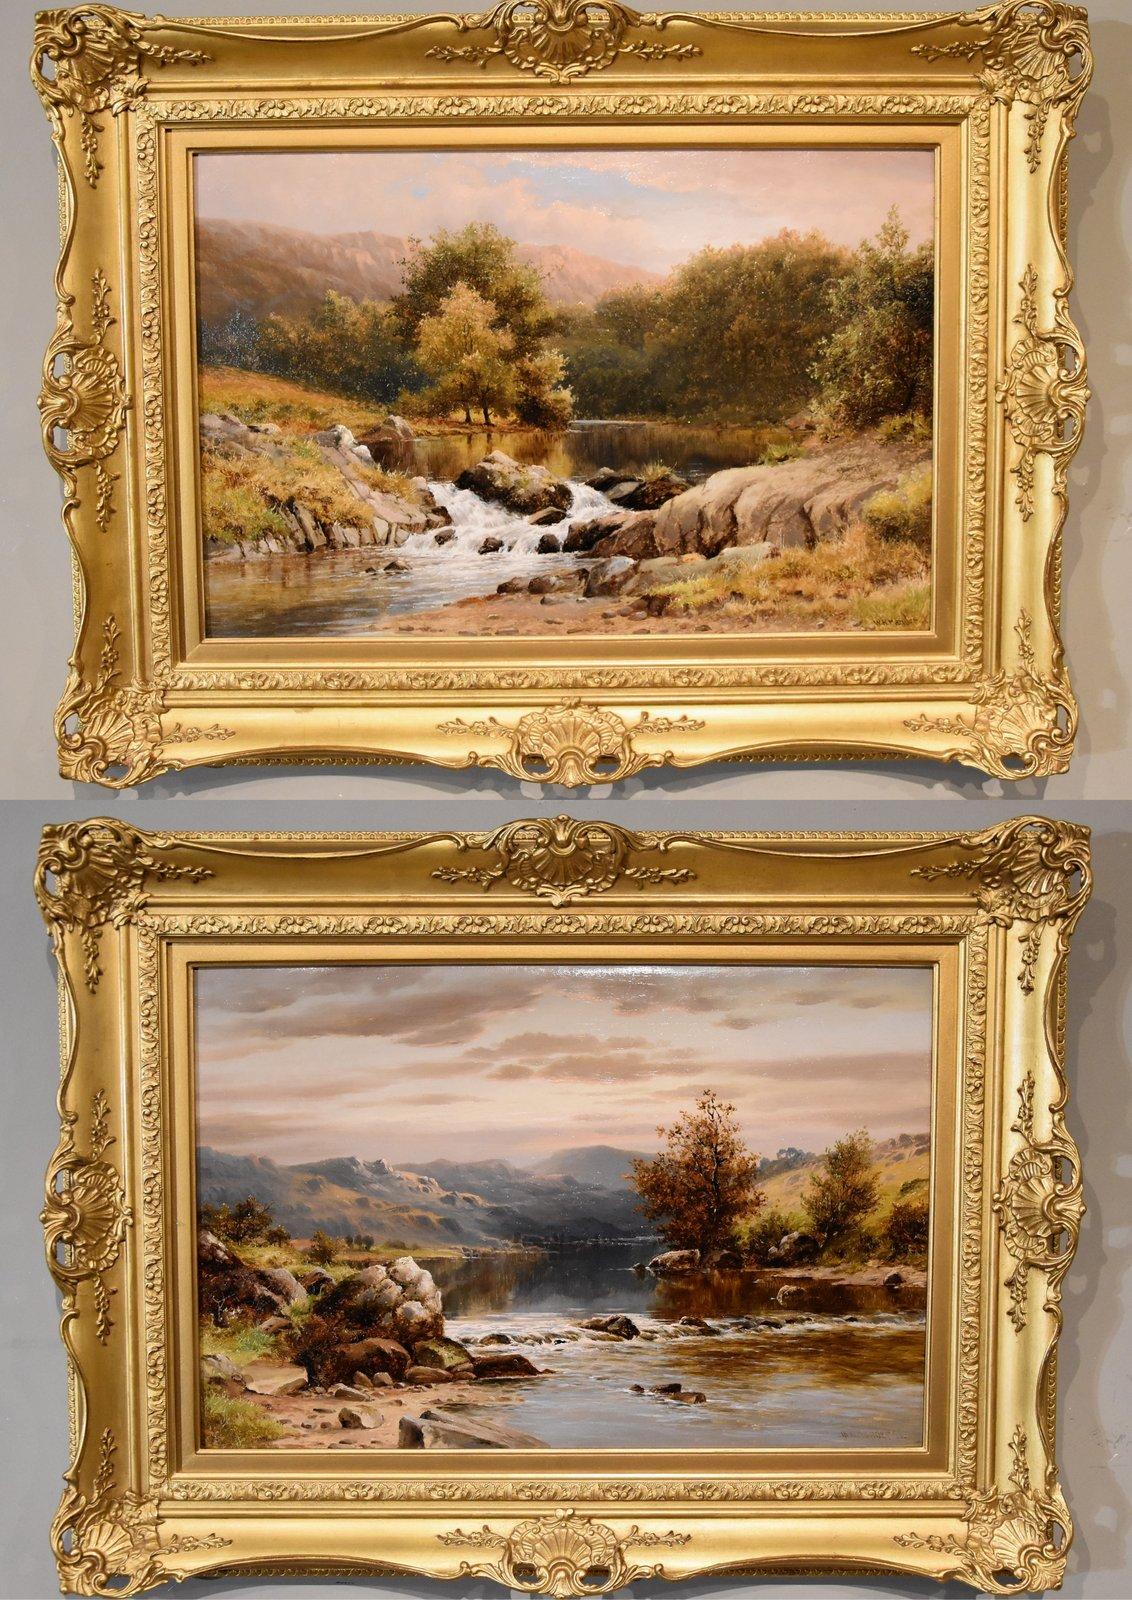 Oil Painting Pair by William Henry Mander "On the Wye" and "On the Llugwy" 1850- 1922  A Midlands painter who exhibited at the Royal Birmingham society of artists, Royal Hiberian Academy in Dublin and Cambrian academy. Both Oil on canvas. Signed and